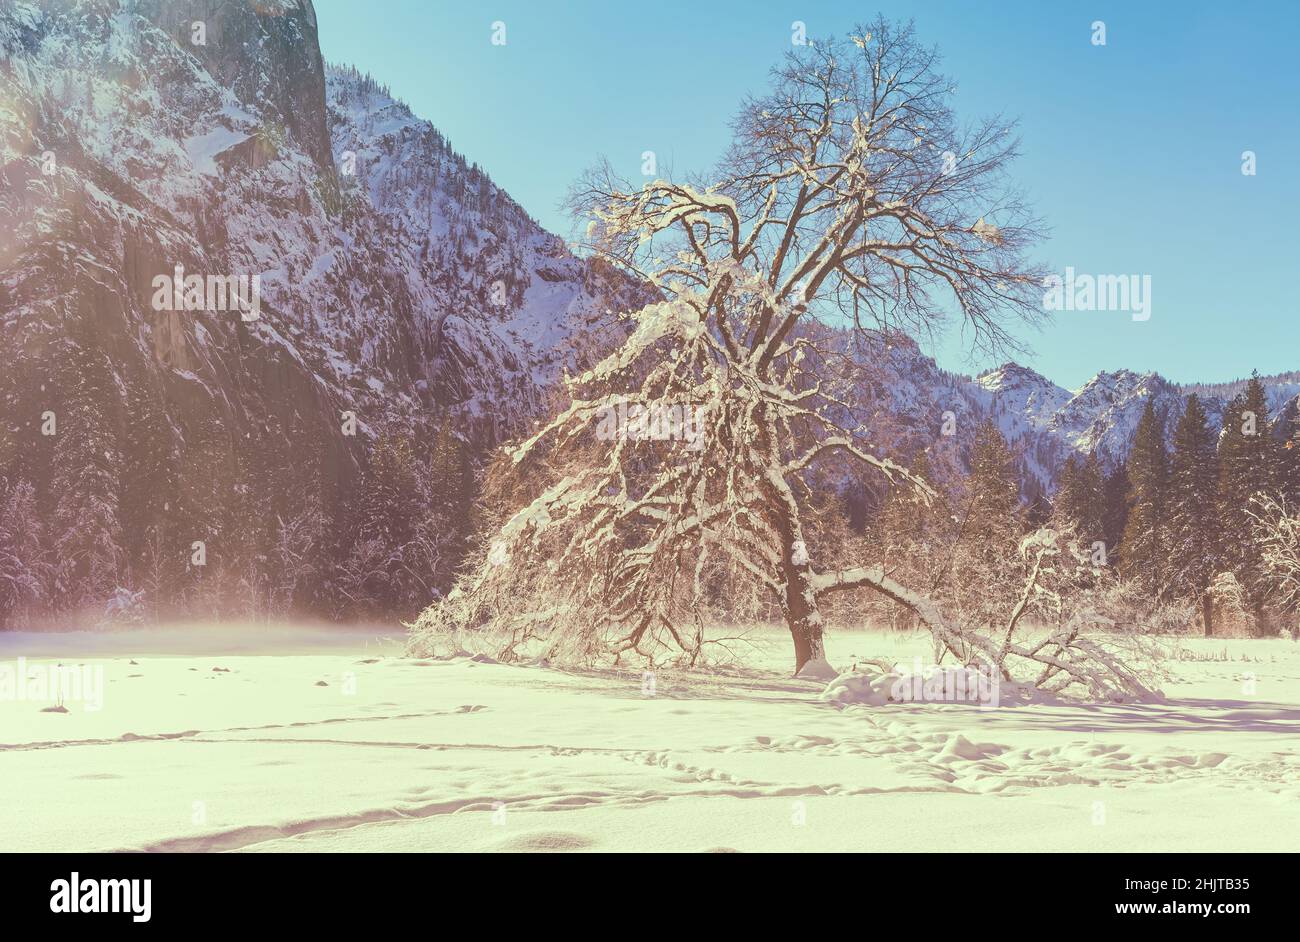 Snow cover the black oak tree and the landscape of Cook Meadow at Yosemite Valley in late winter, California, United States. Stock Photo